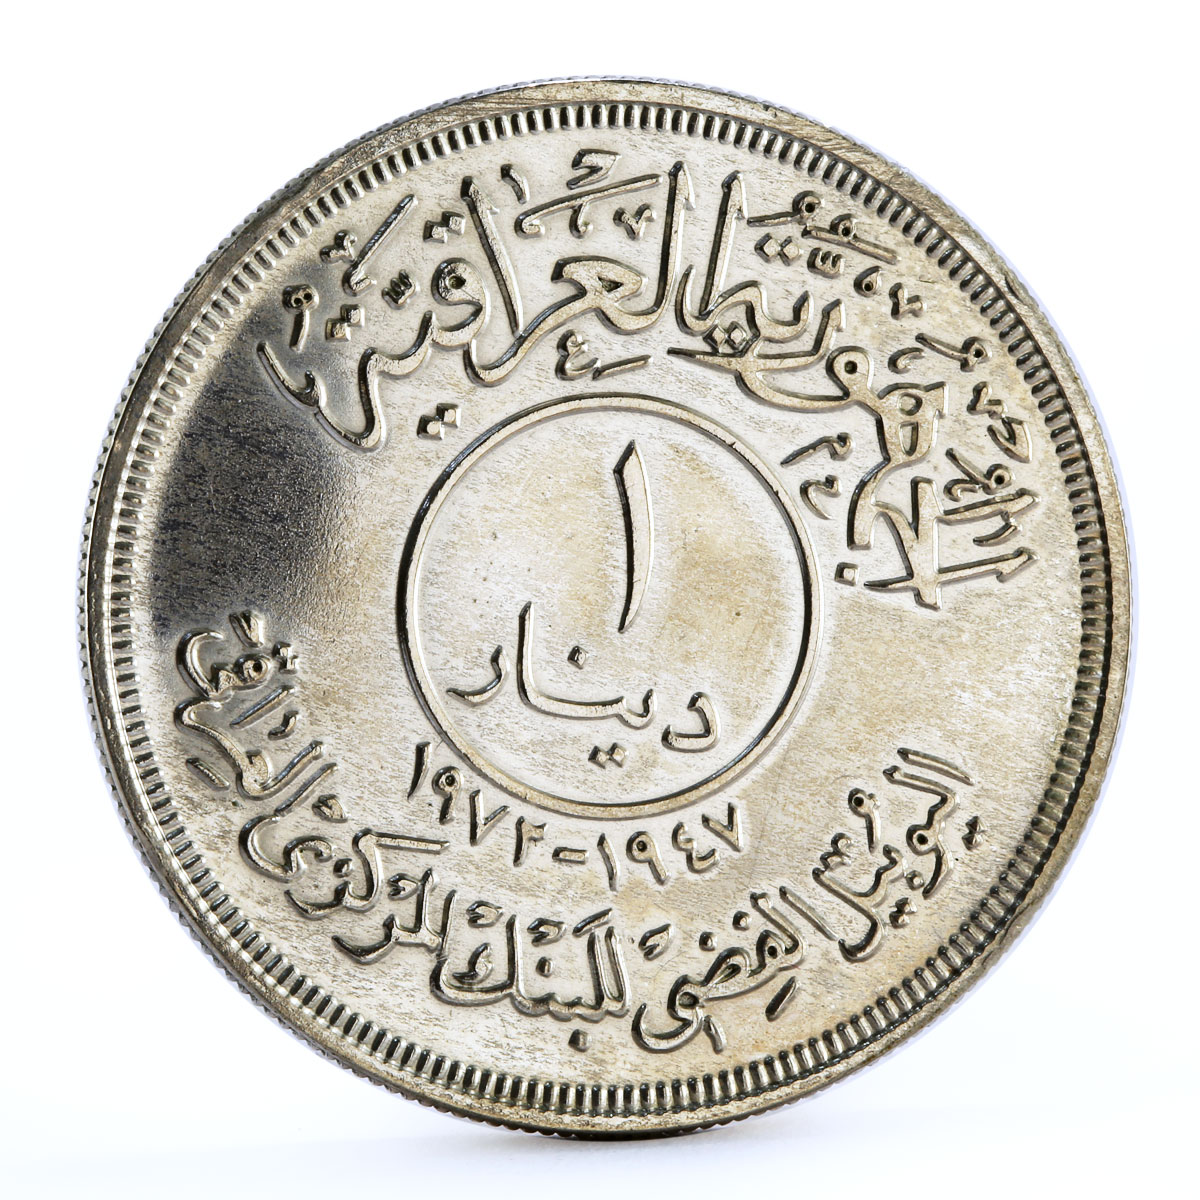 Iraq 1 dinar 25th Anniversary of Central Bank silver coin 1972